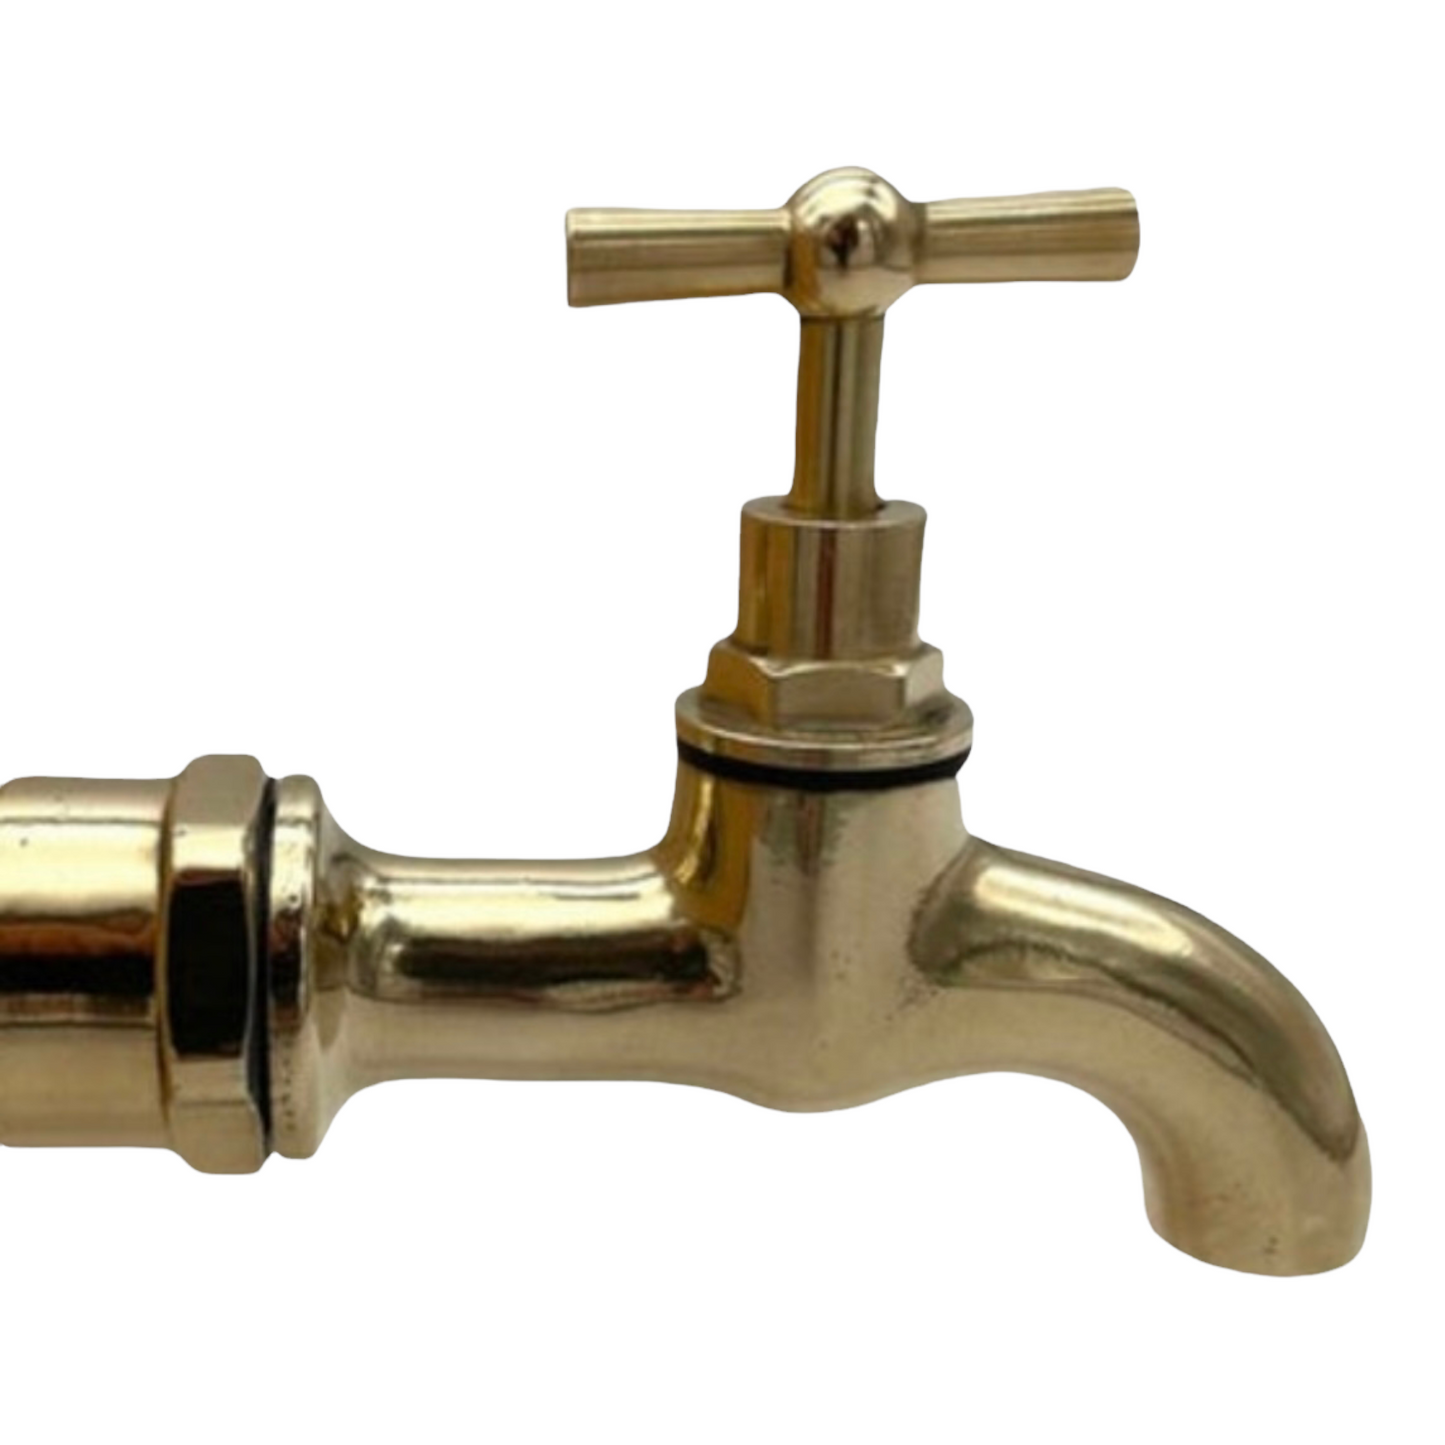 image of brass wall mounted tap for kitchen or bathroom sink